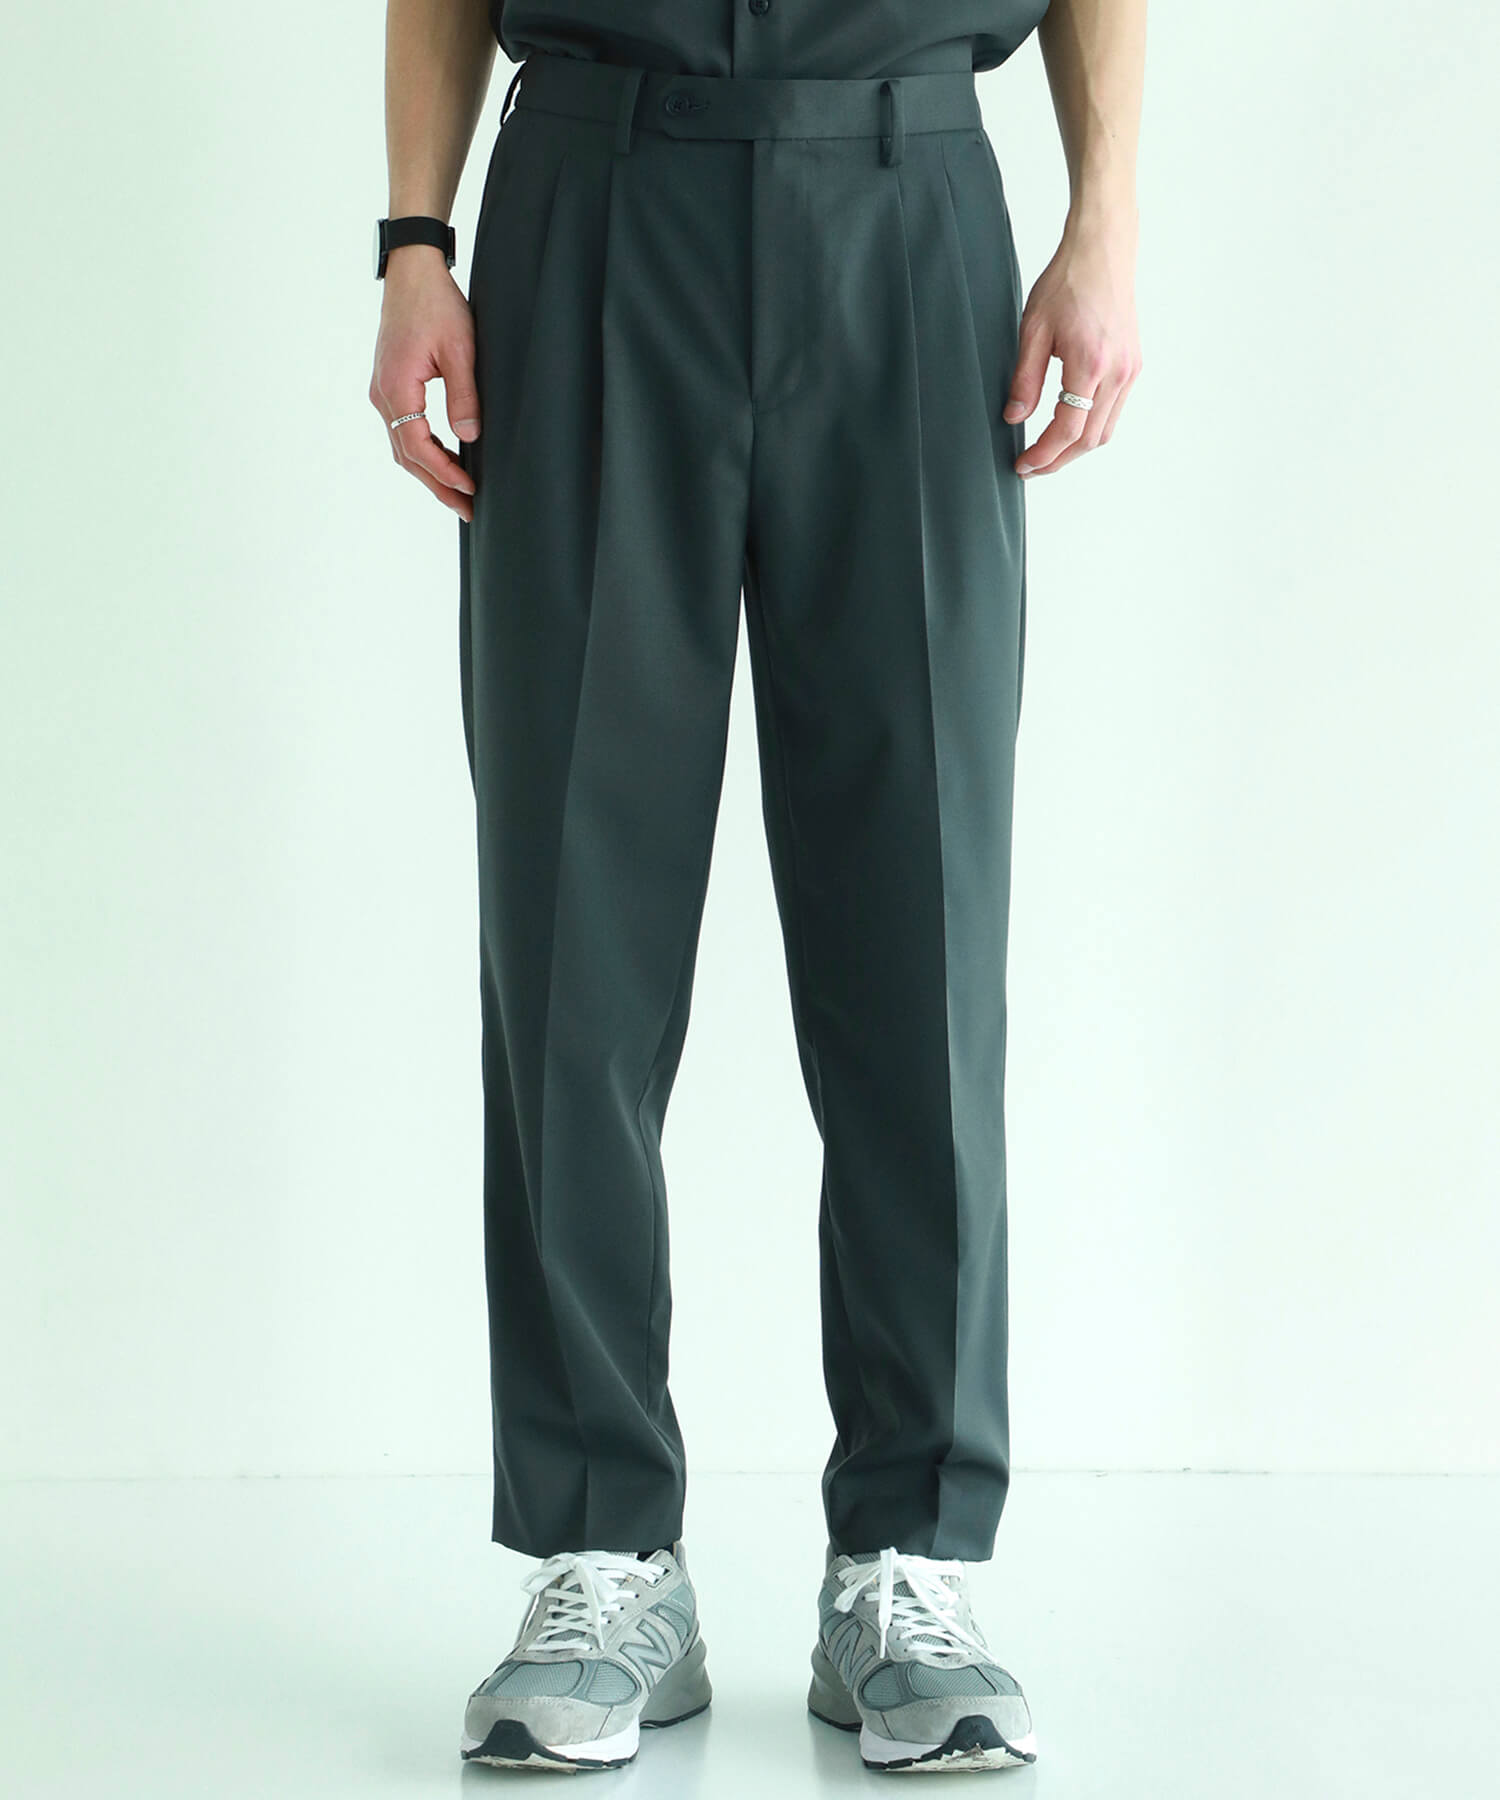 TWO SIDED TAPERED PANTS